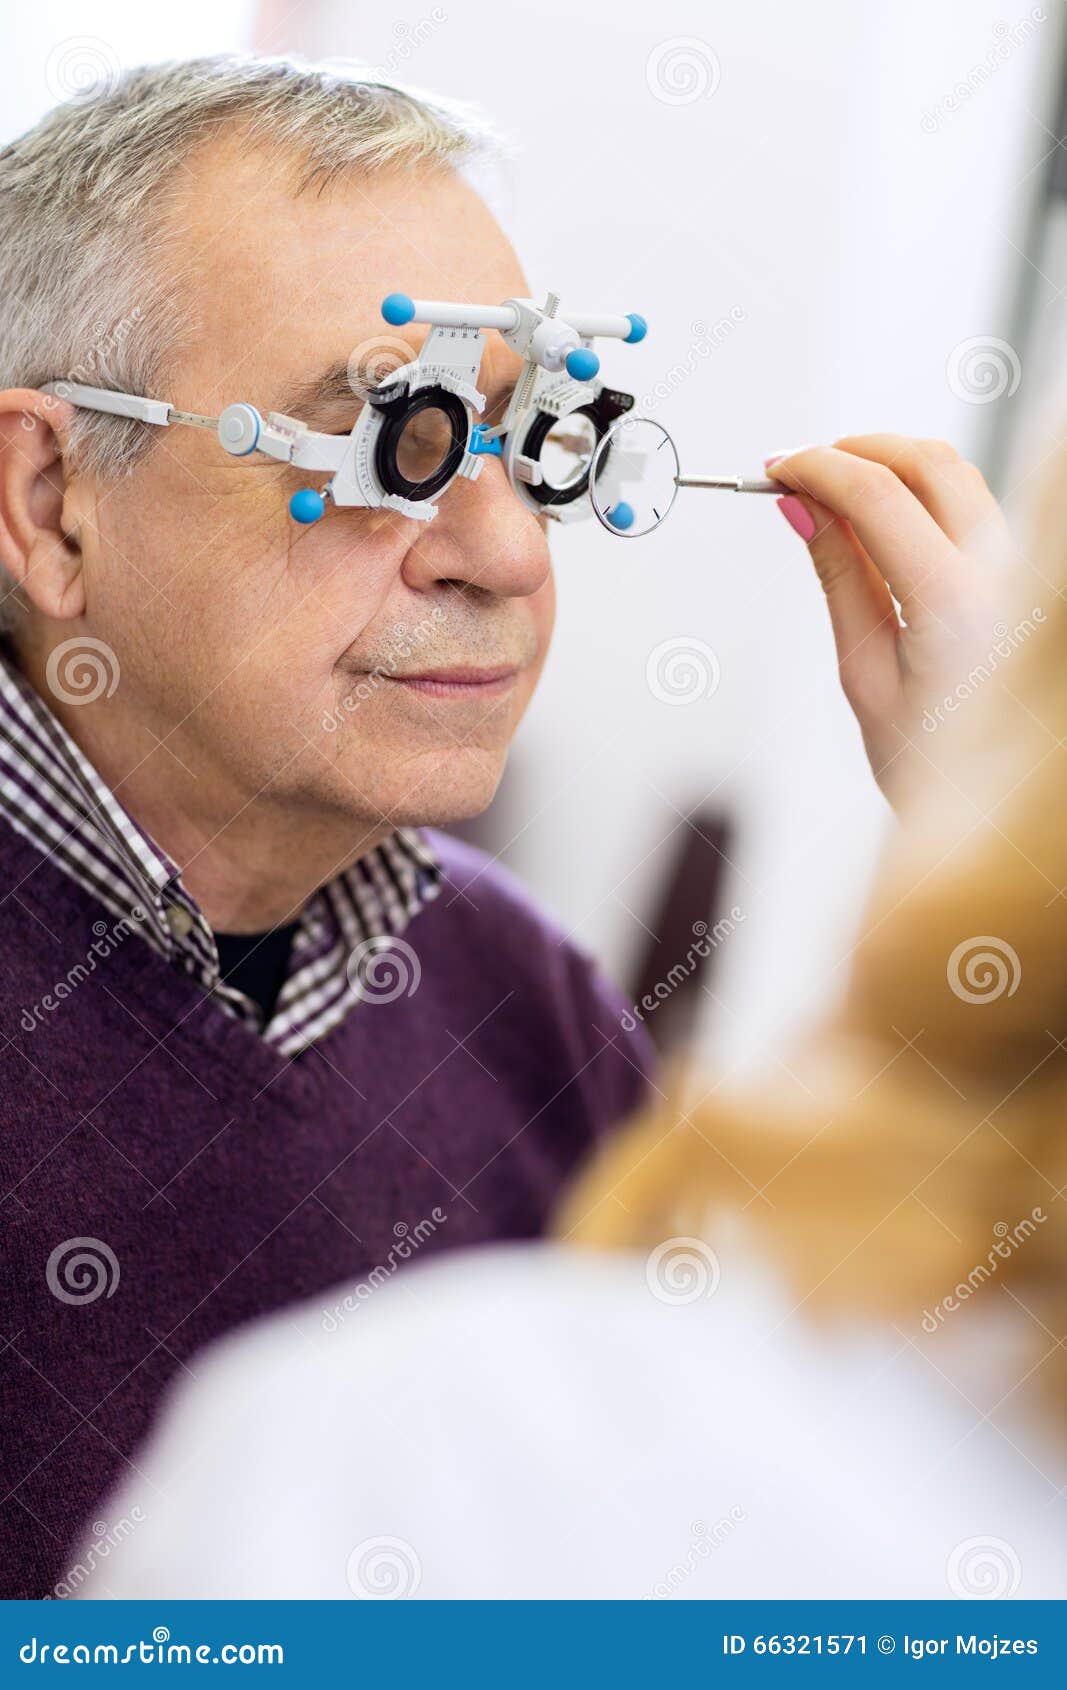 ophthalmic doctor measure distance of eyes pupil